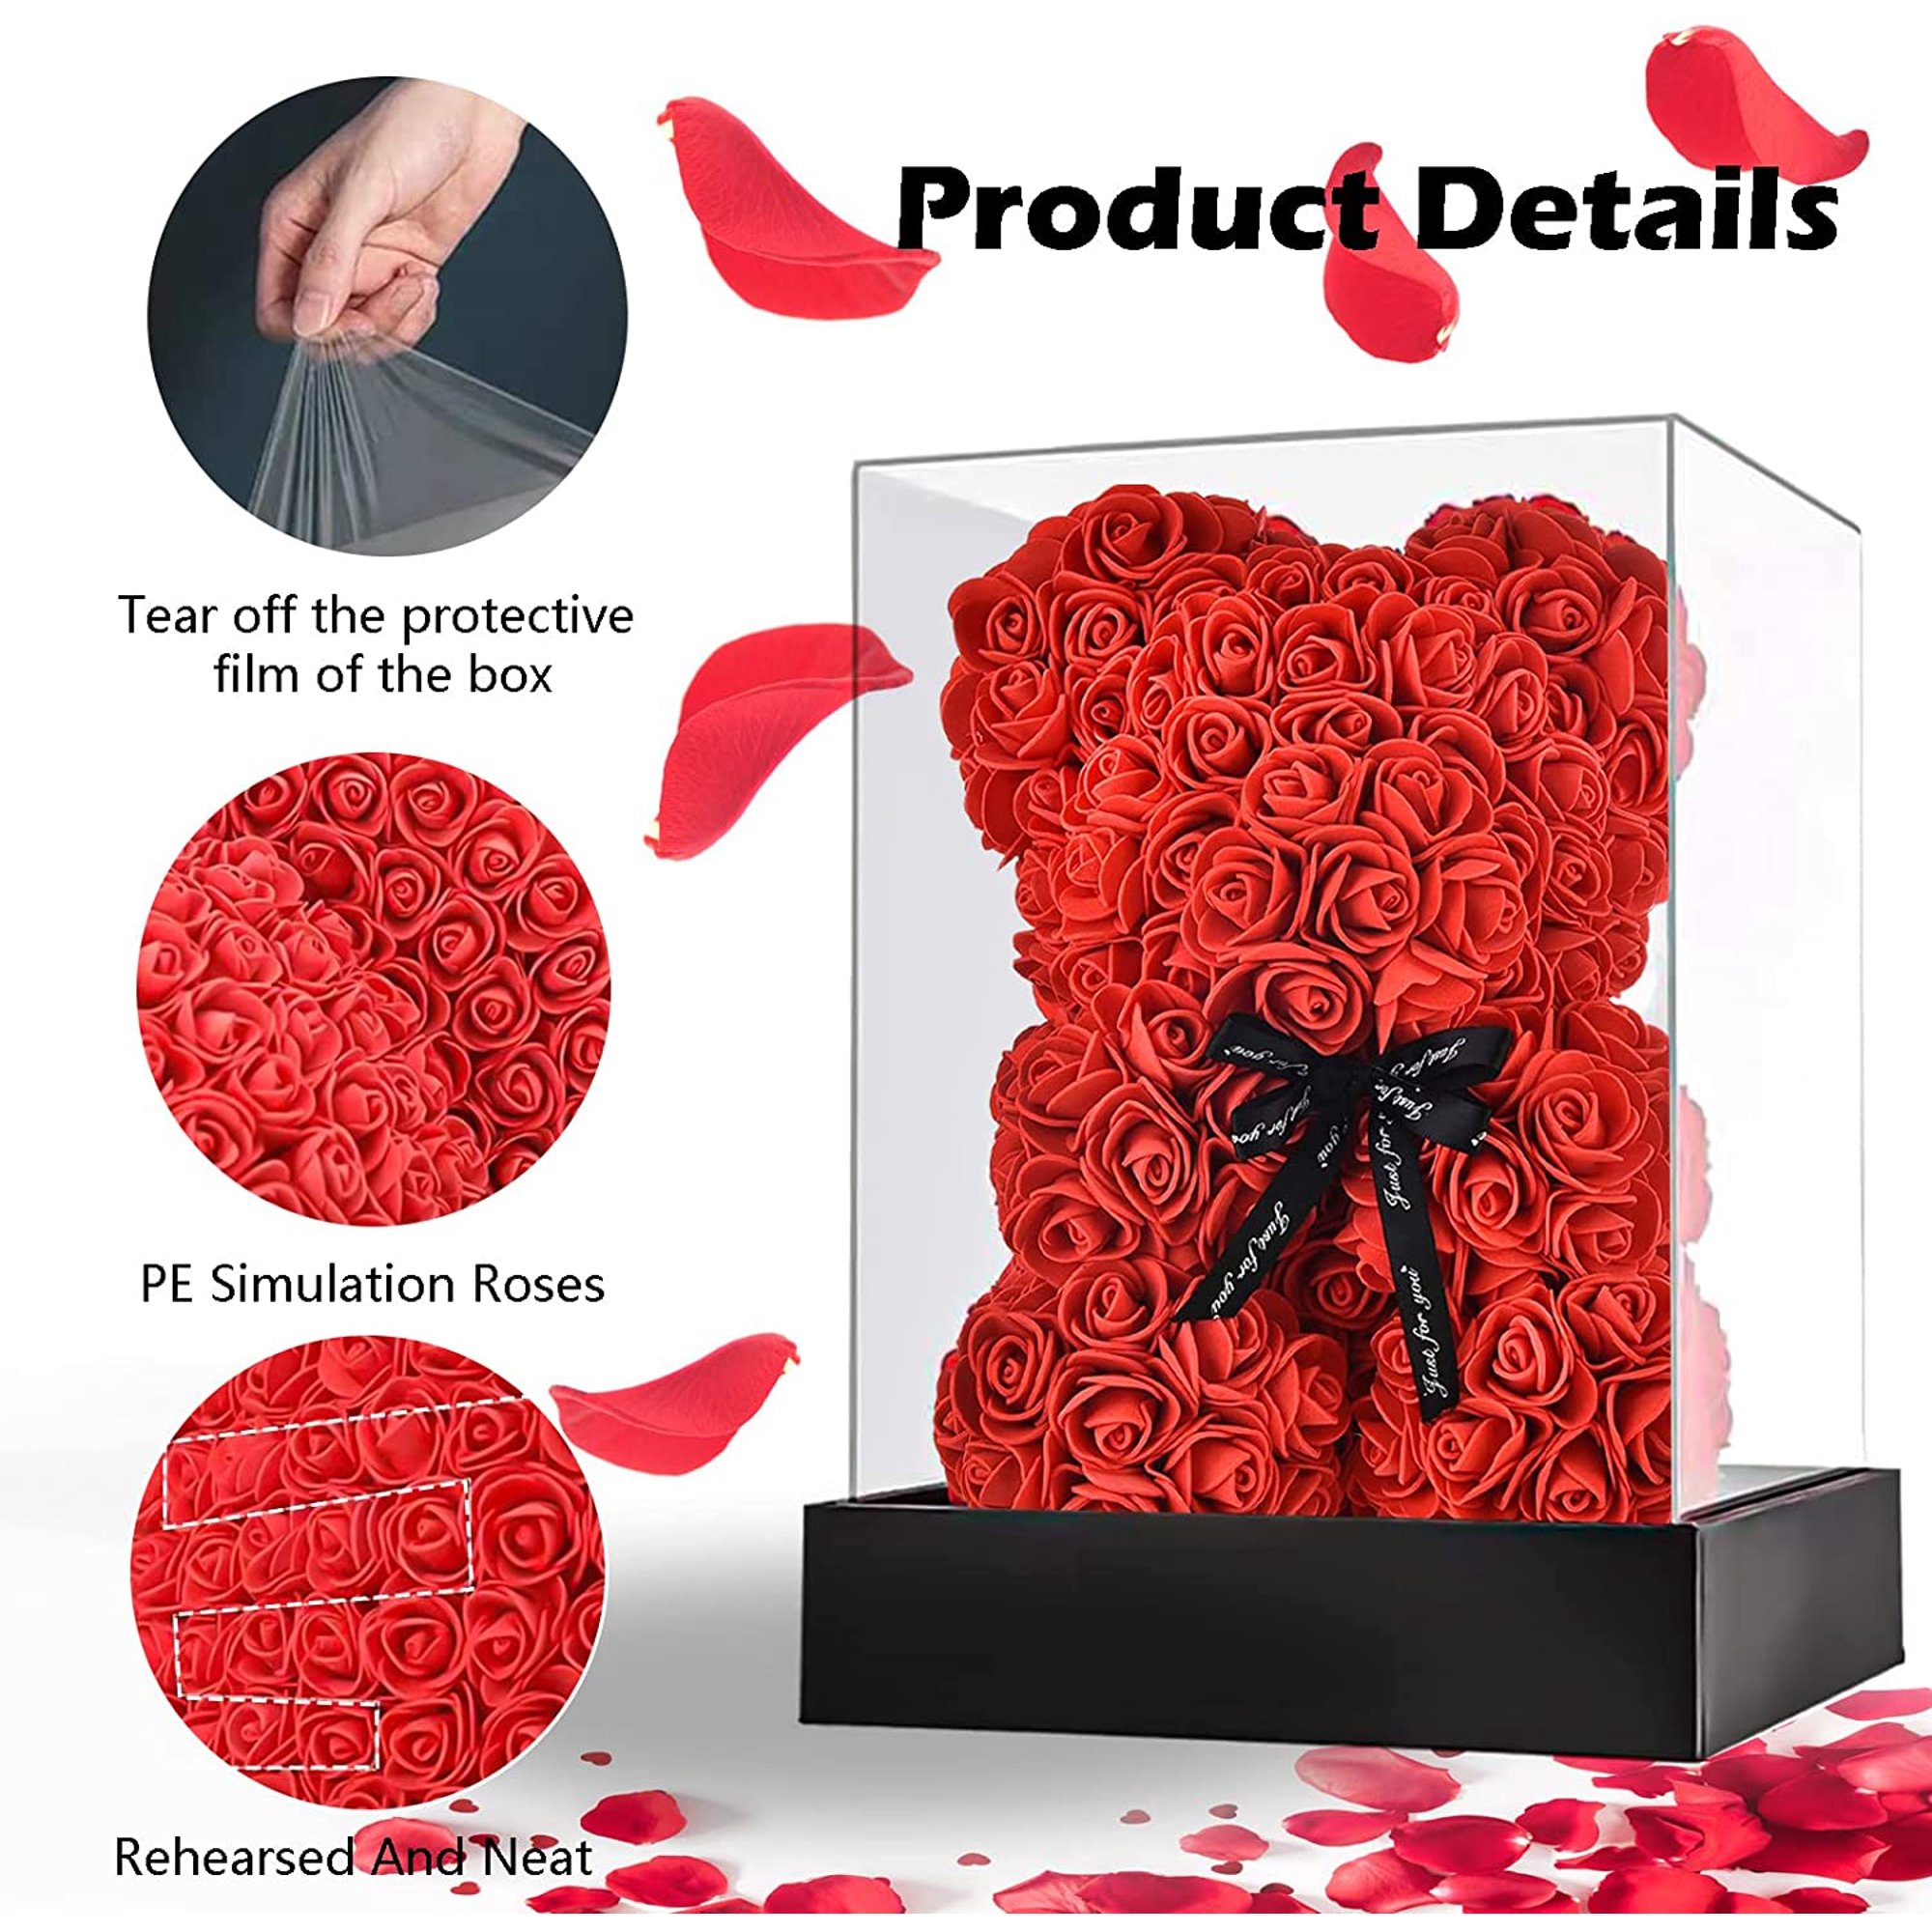 Madala Rose Bear with Box 10 inch, Valentines Day Gifts for Her Him, Red Artificial Flower Bear Gifts for Grandma, Mom, Mothers Day, Birthday - image 2 of 7